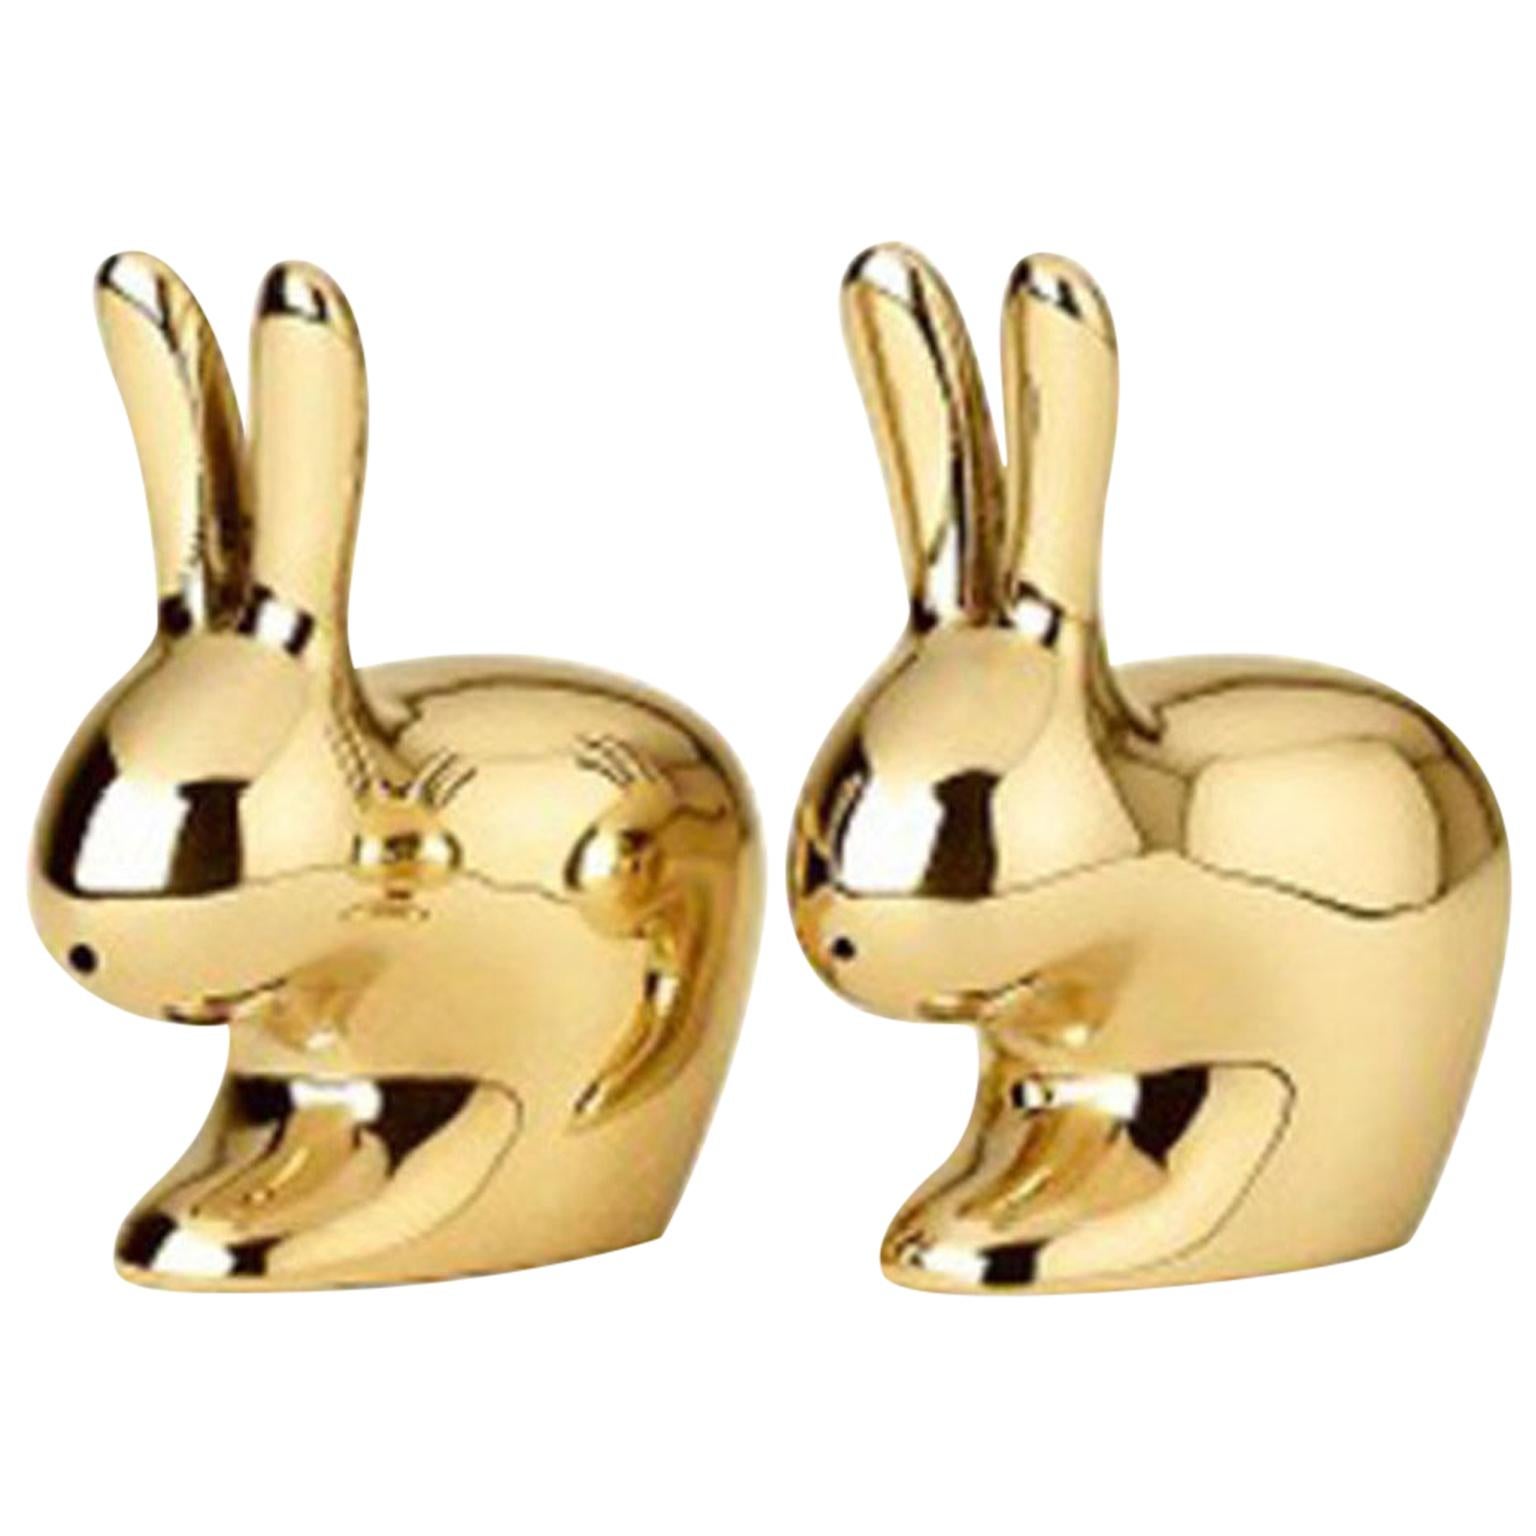 Ghidini 1961 Italian Brass Rabbit Him and Her with Personalized Engraved Names For Sale